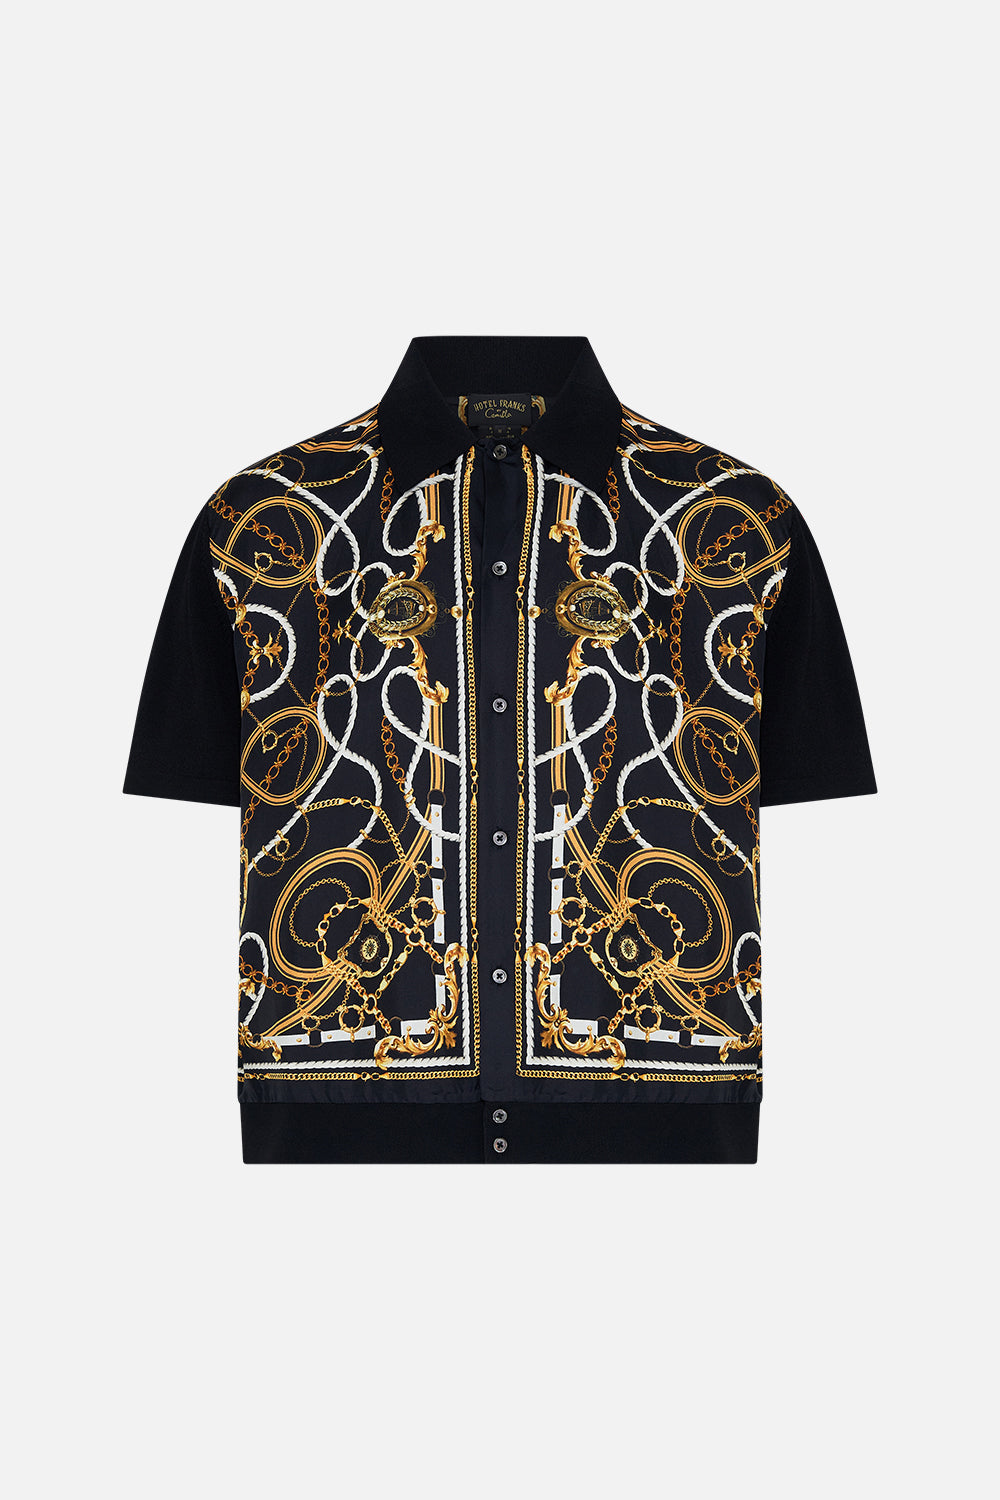 Product view of Hotel Franks By CAMILLA mens silk shirt in Coast to Coast print